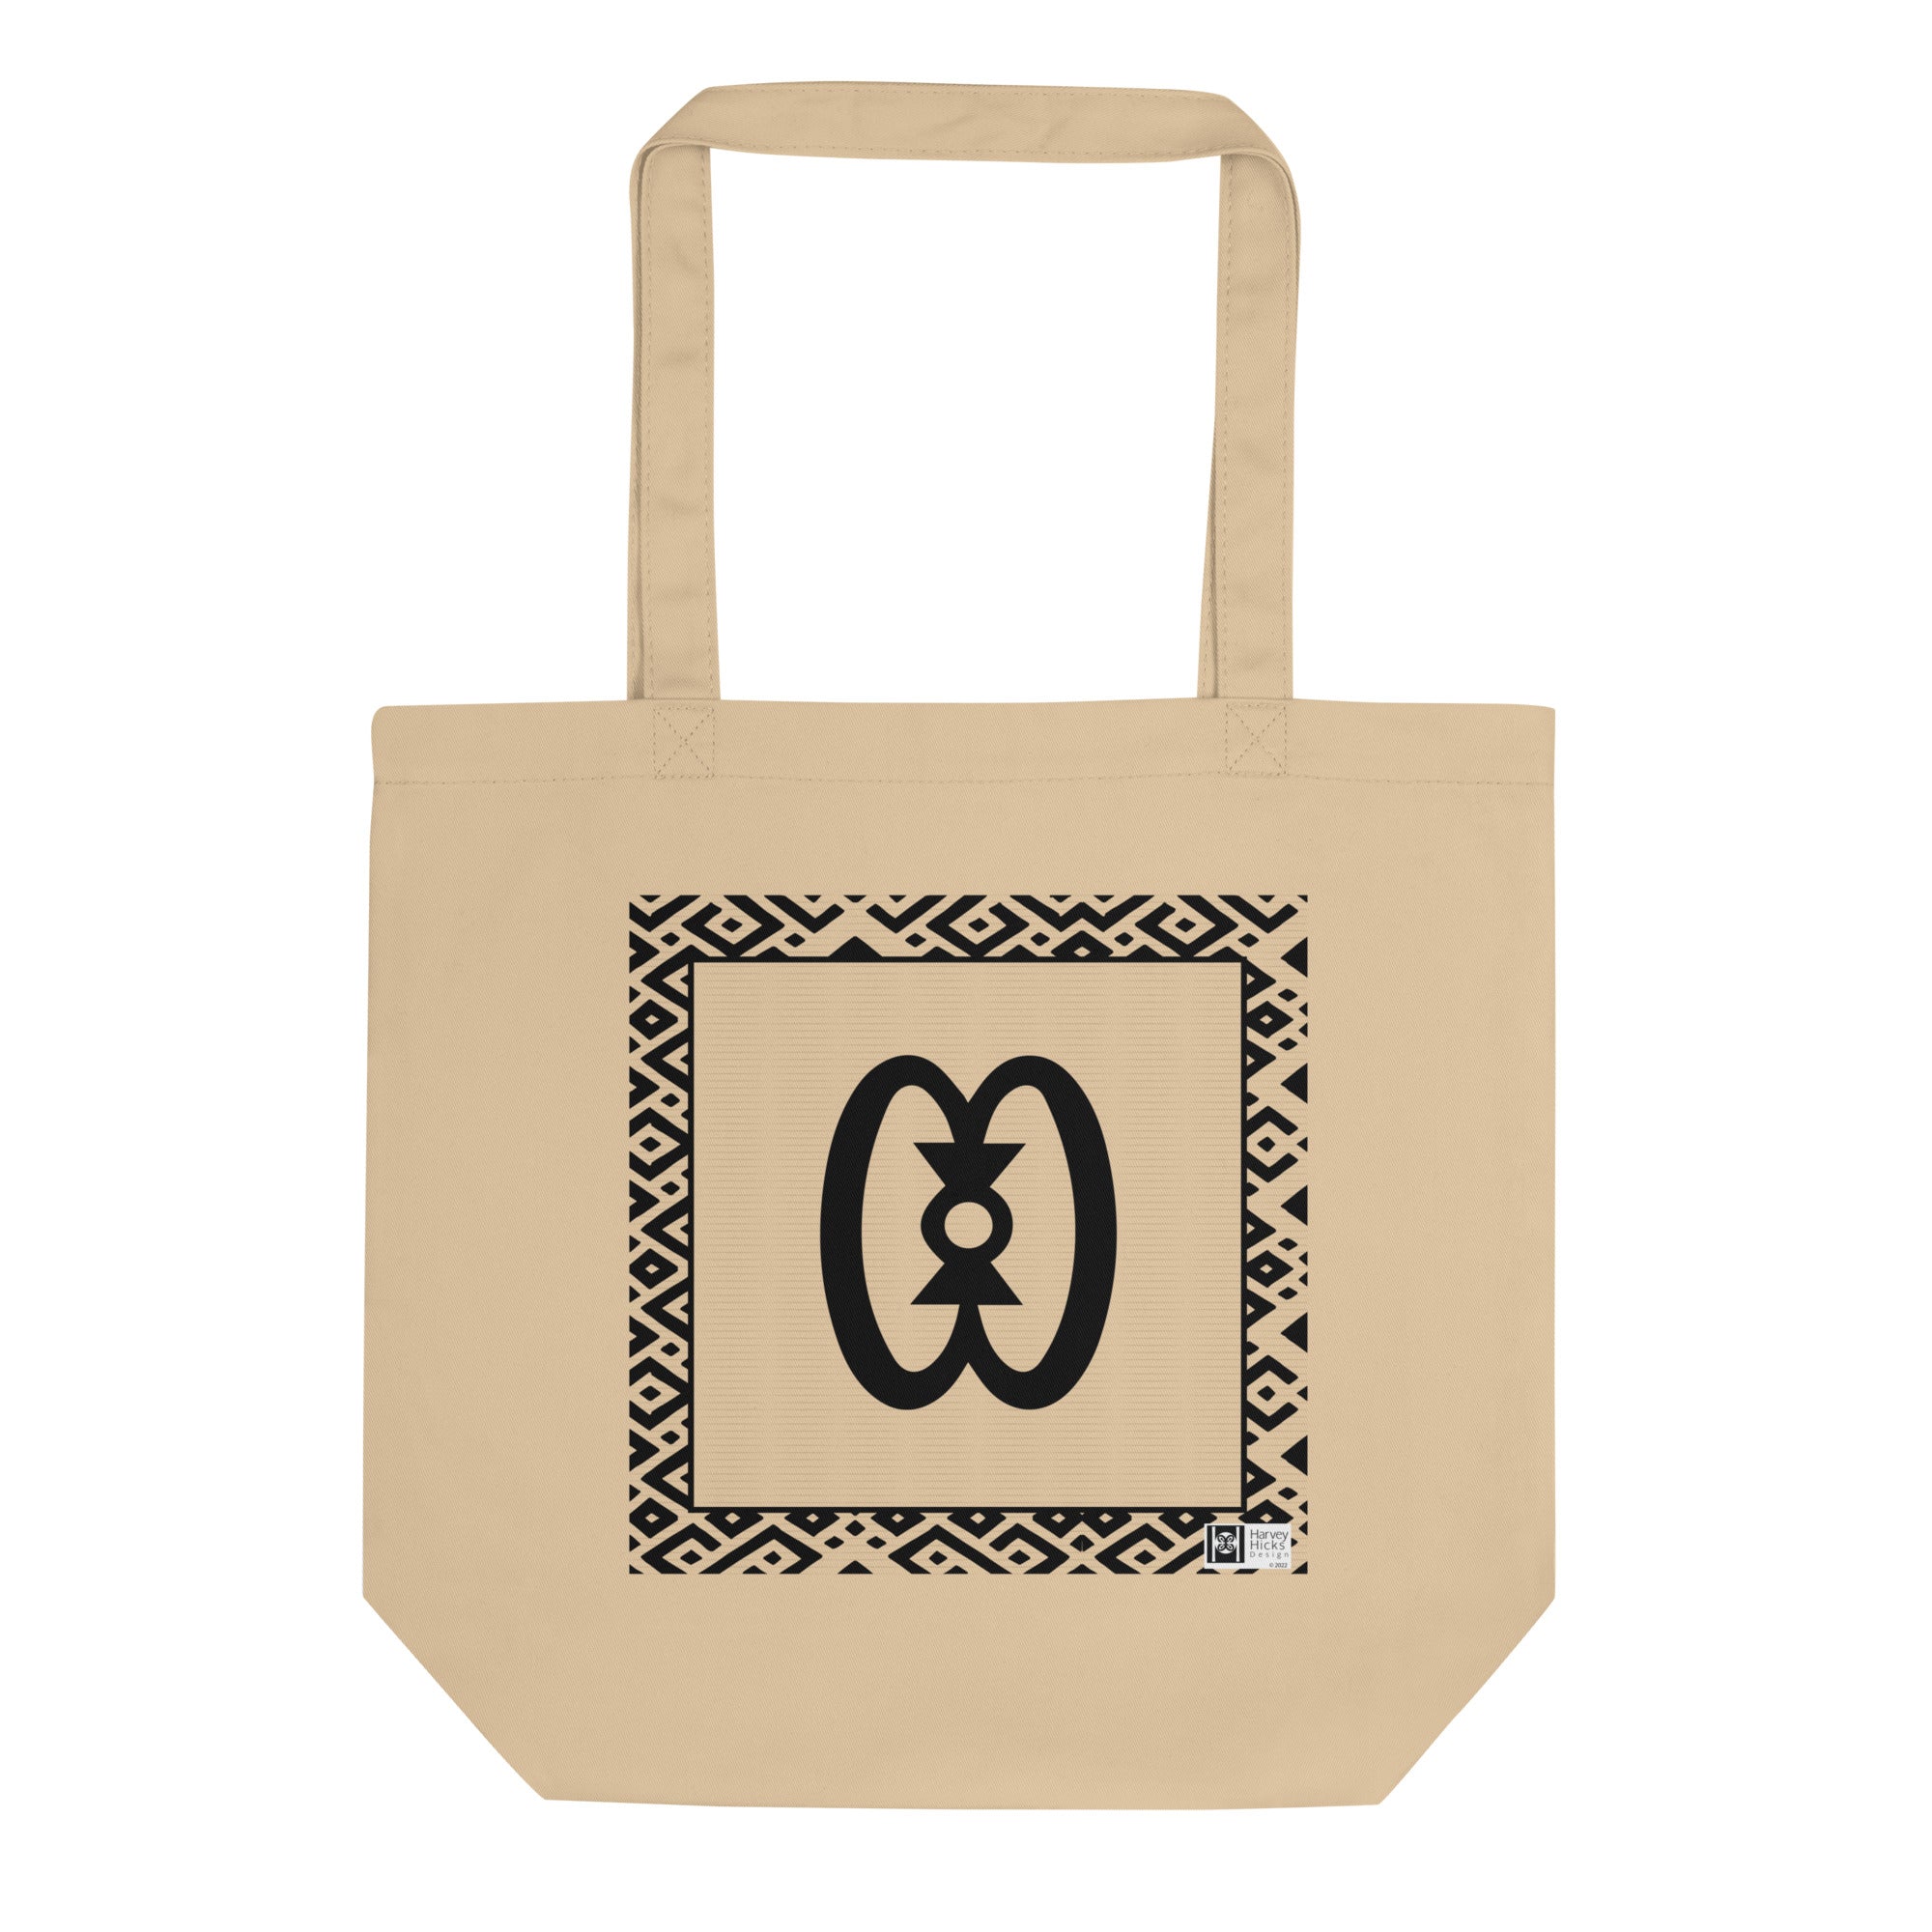 100% cotton Eco Tote Bag, featuring the Adinkra symbol for democracy, NO TEXT